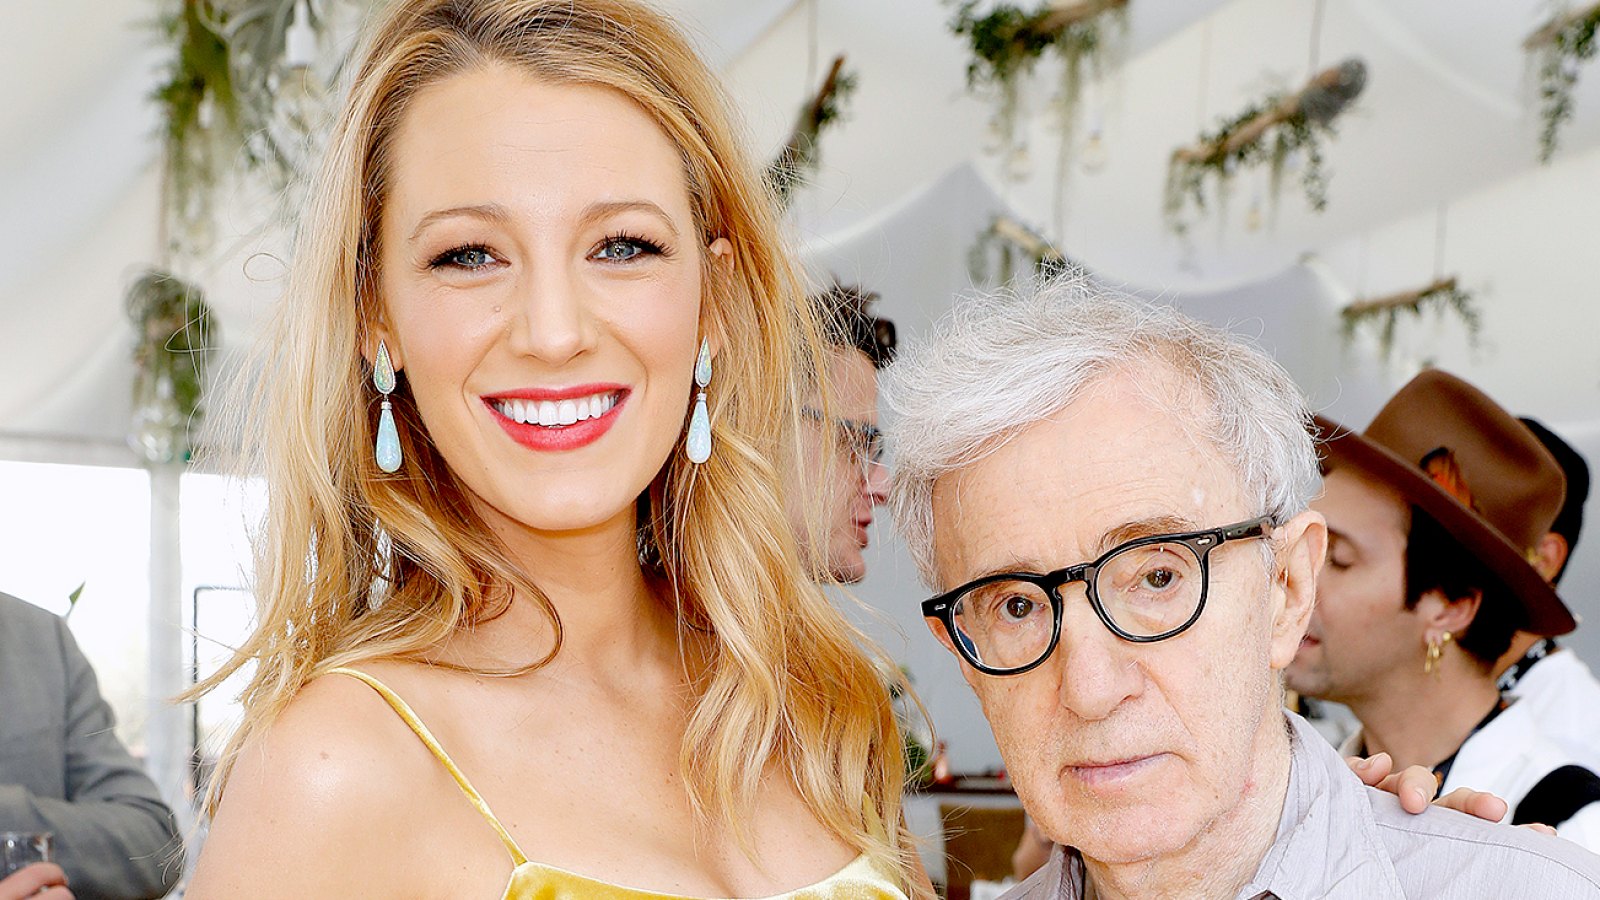 Blake Lively and director Woody Allen attend the Amazon Studios "Cafe Society" press luncheon during the 69th annual Cannes film festival on May 12, 2016 in Cannes, France.